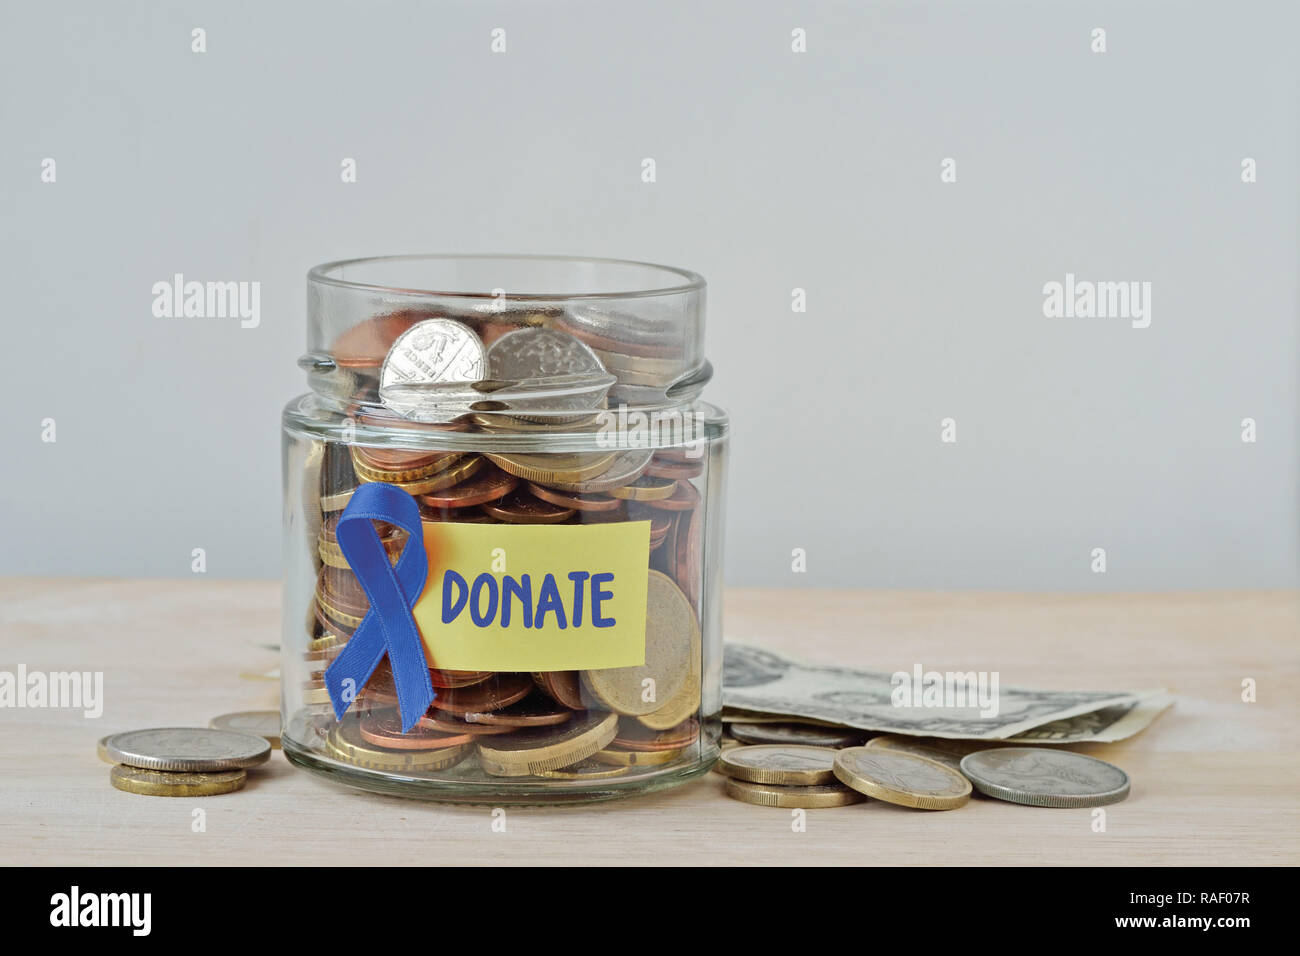 Money jar full of coins with blue ribbon and Donate label - Concept of prostate cancer charity and research fund Stock Photo